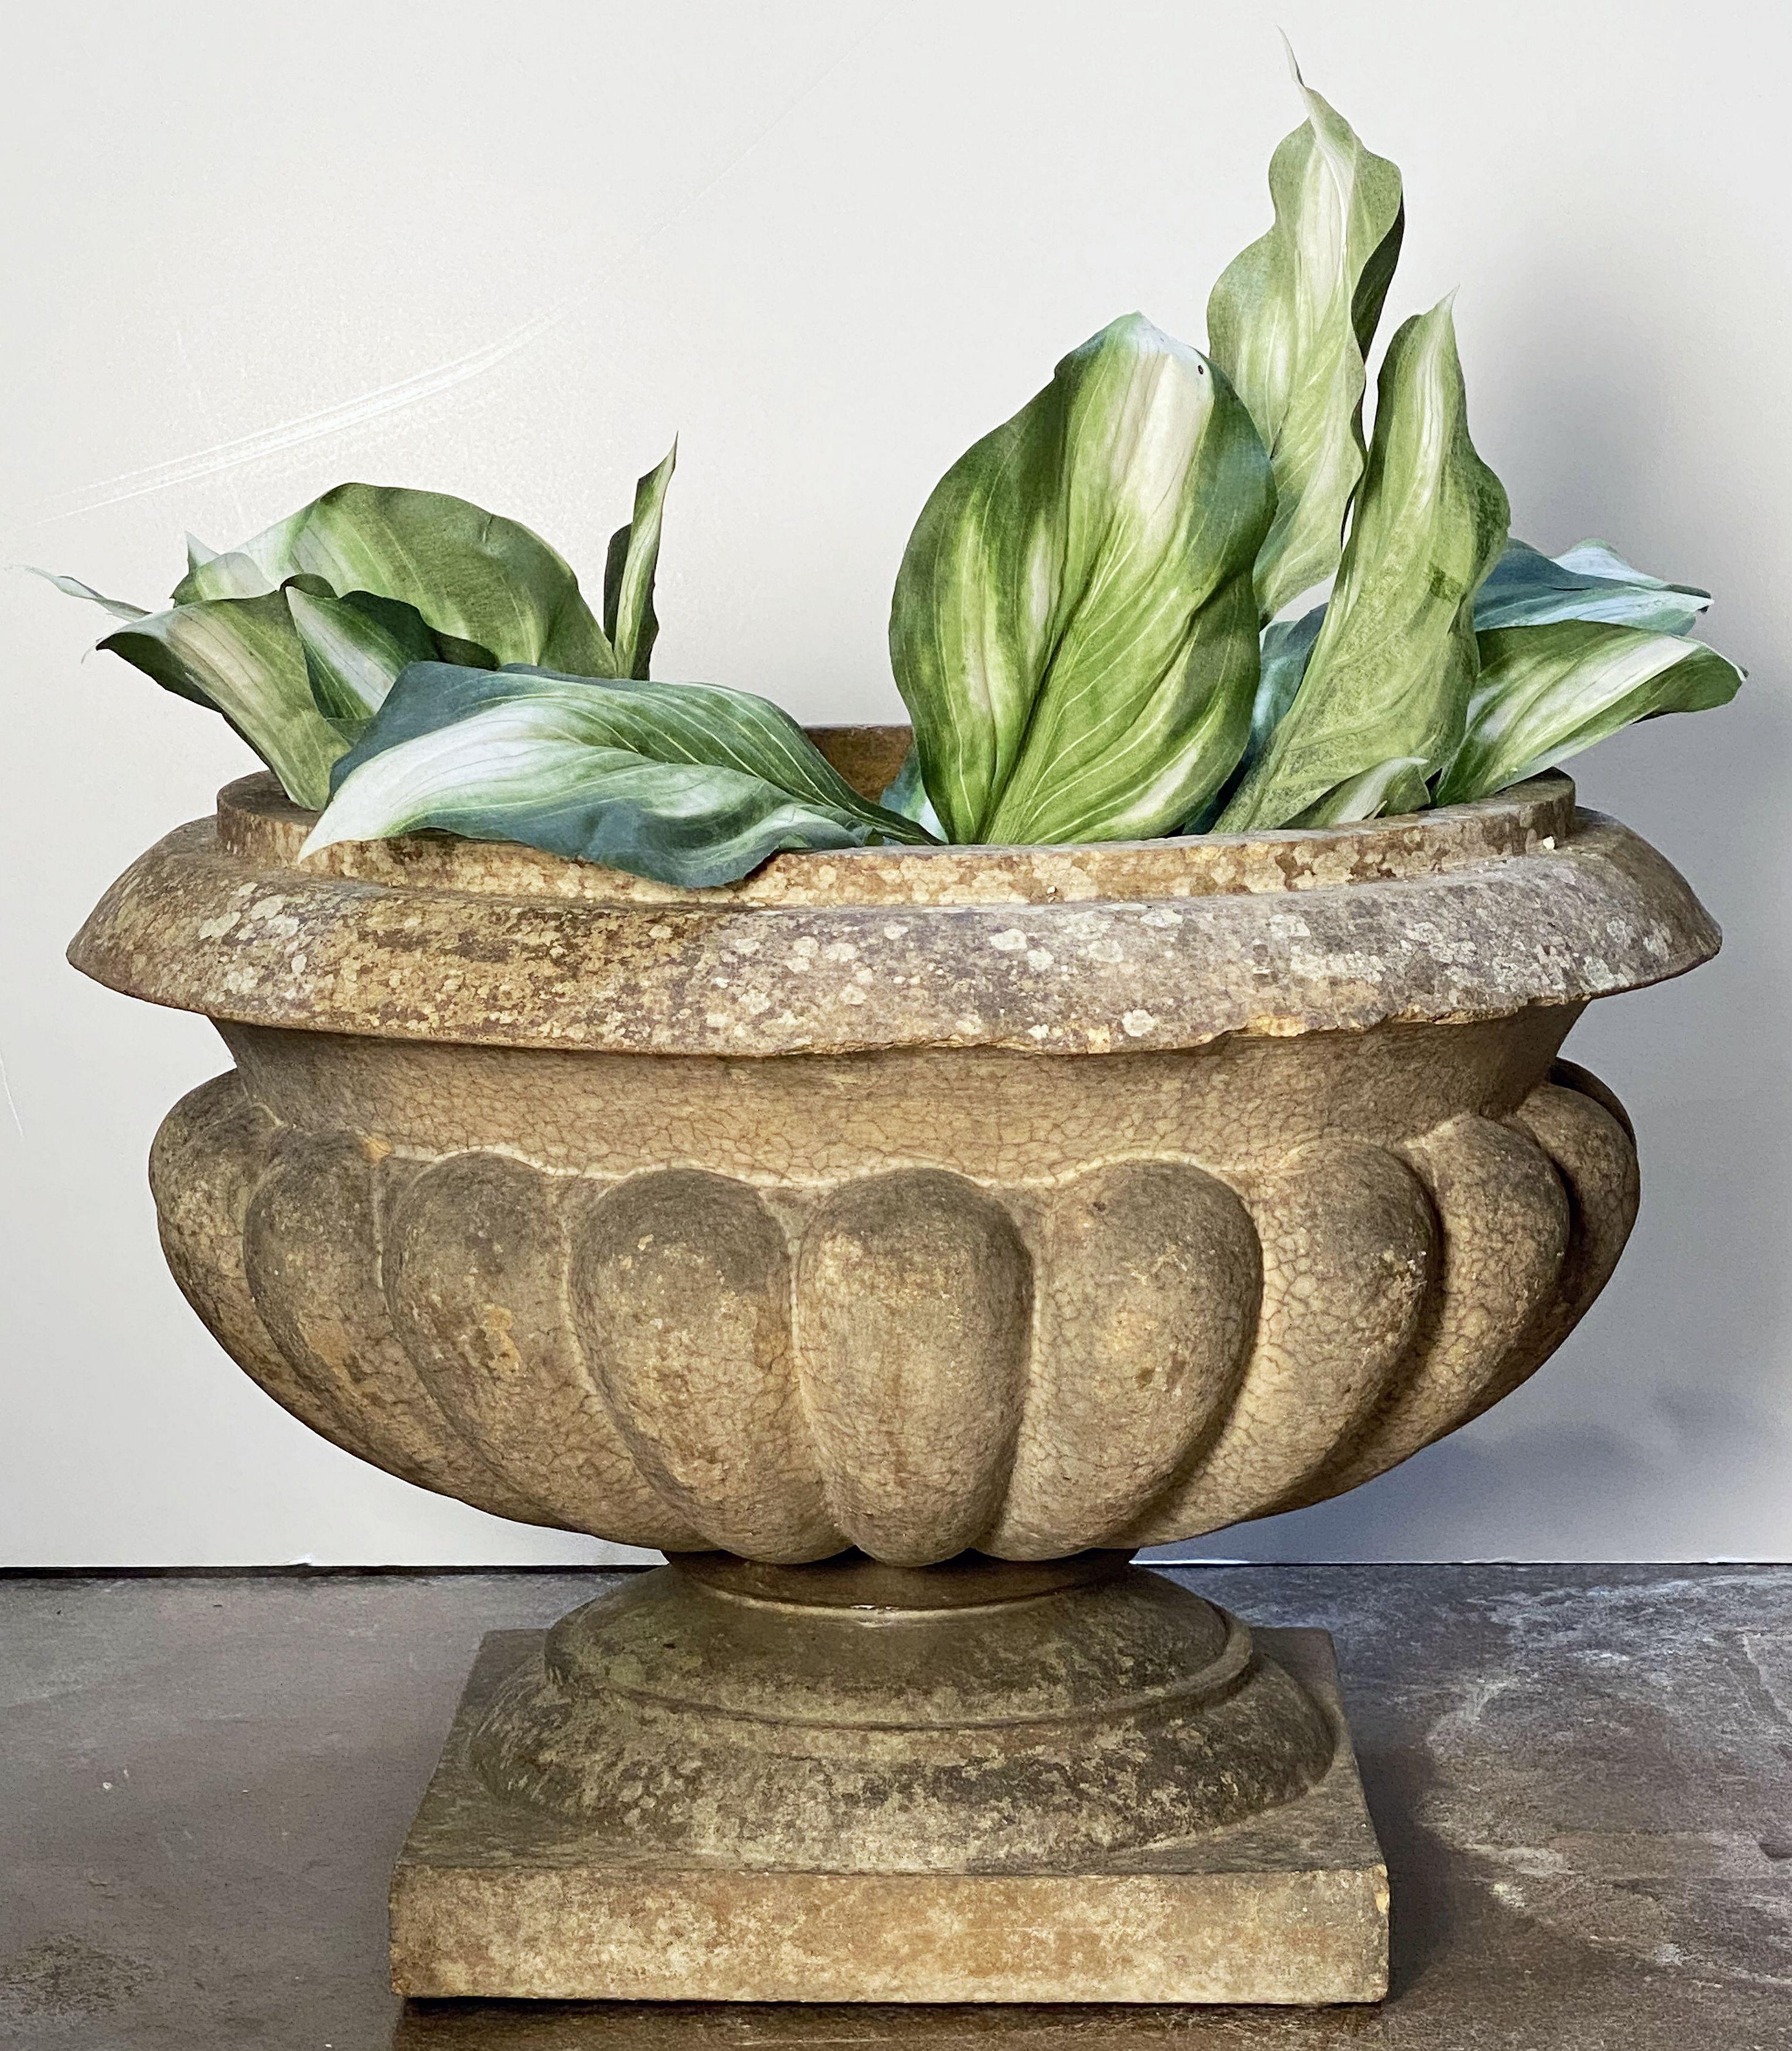 A fine English garden urn or planter pot of terra cotta in the Classical style, featuring a round rolled edge over a segmented or fluted body and resting a square pedestal plinth base.

Dimensions are Height 14 1/2 inches x (Outside) Diameter 21